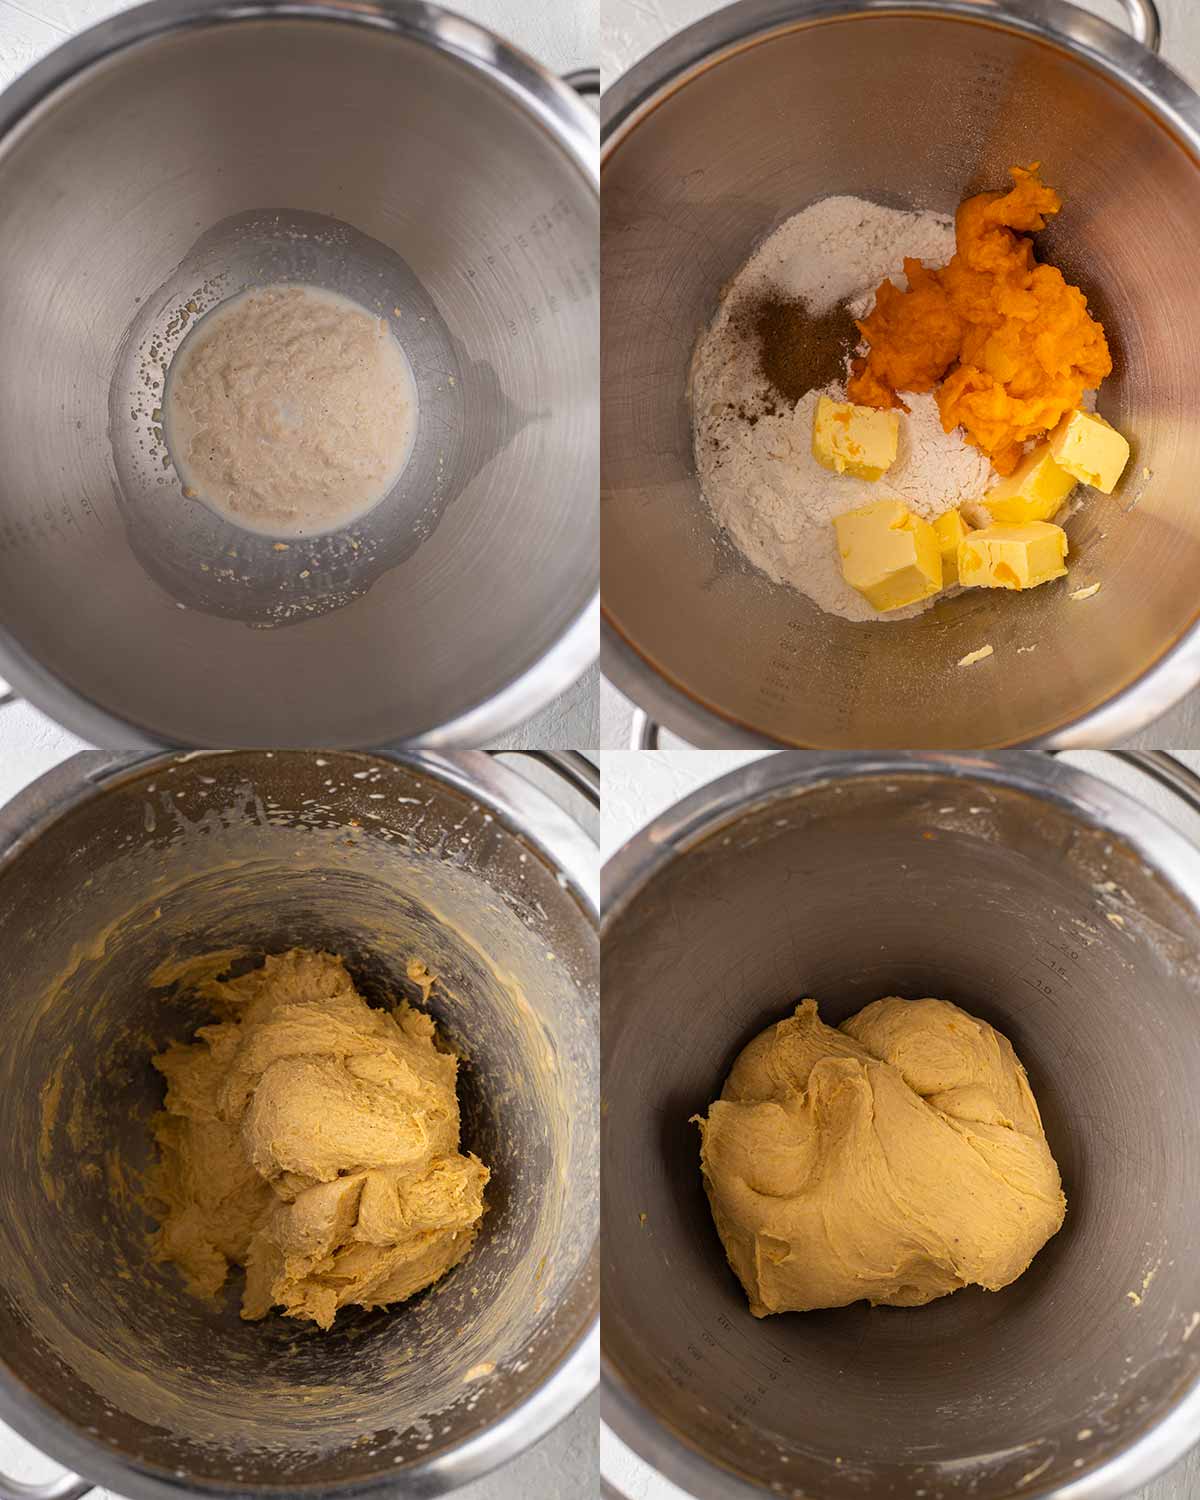 Four image collage of the ingredients and pumpkin dough in the bowl of a stand mixer.